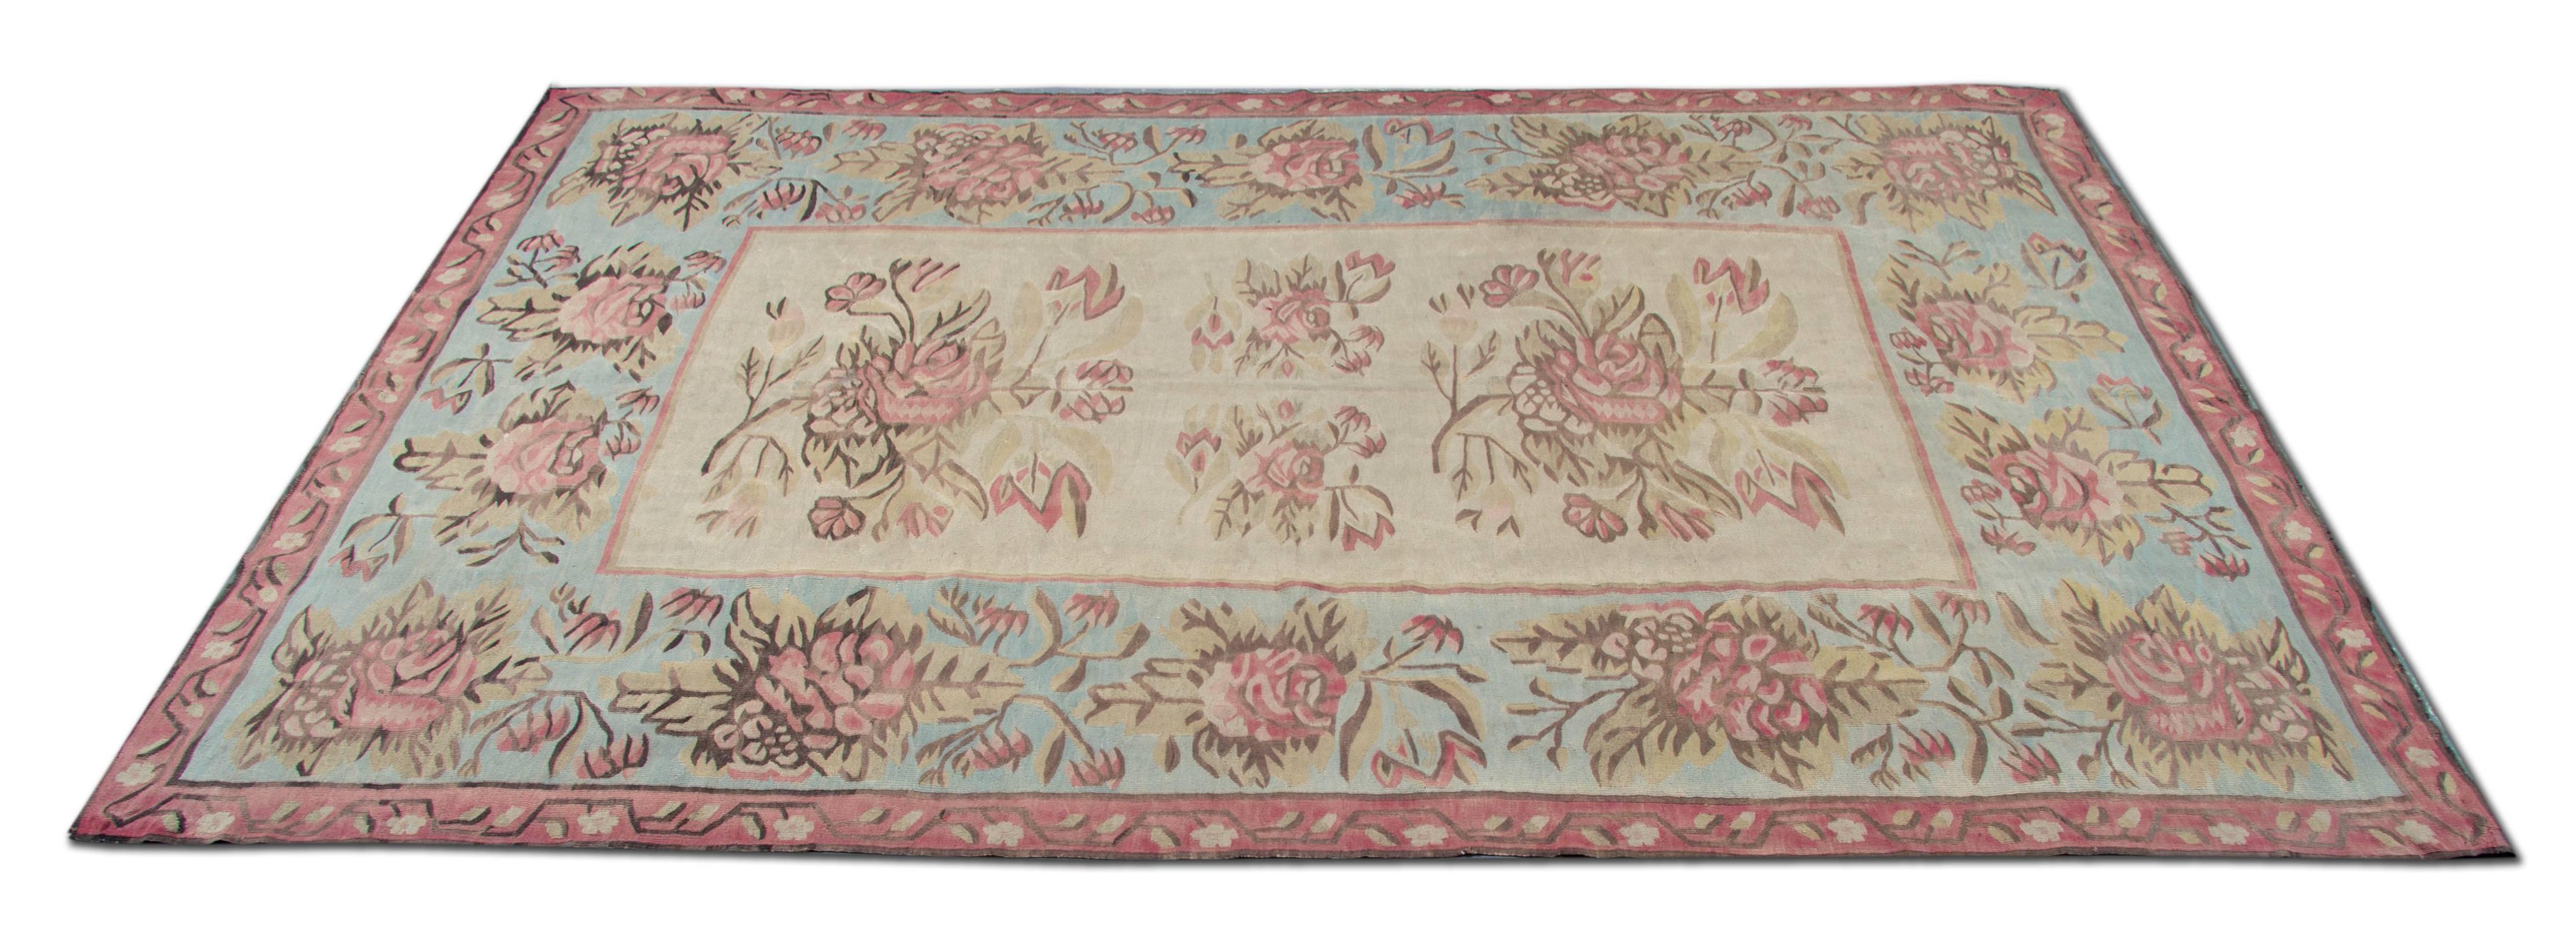 Bessarabian kilims are the commonly given name for carpets in pile and tapestry technique originating in Russian provinces as well as Ukraine and Moldova during the late 19th and early 20th centuries. This is an example of floral rug design, circa